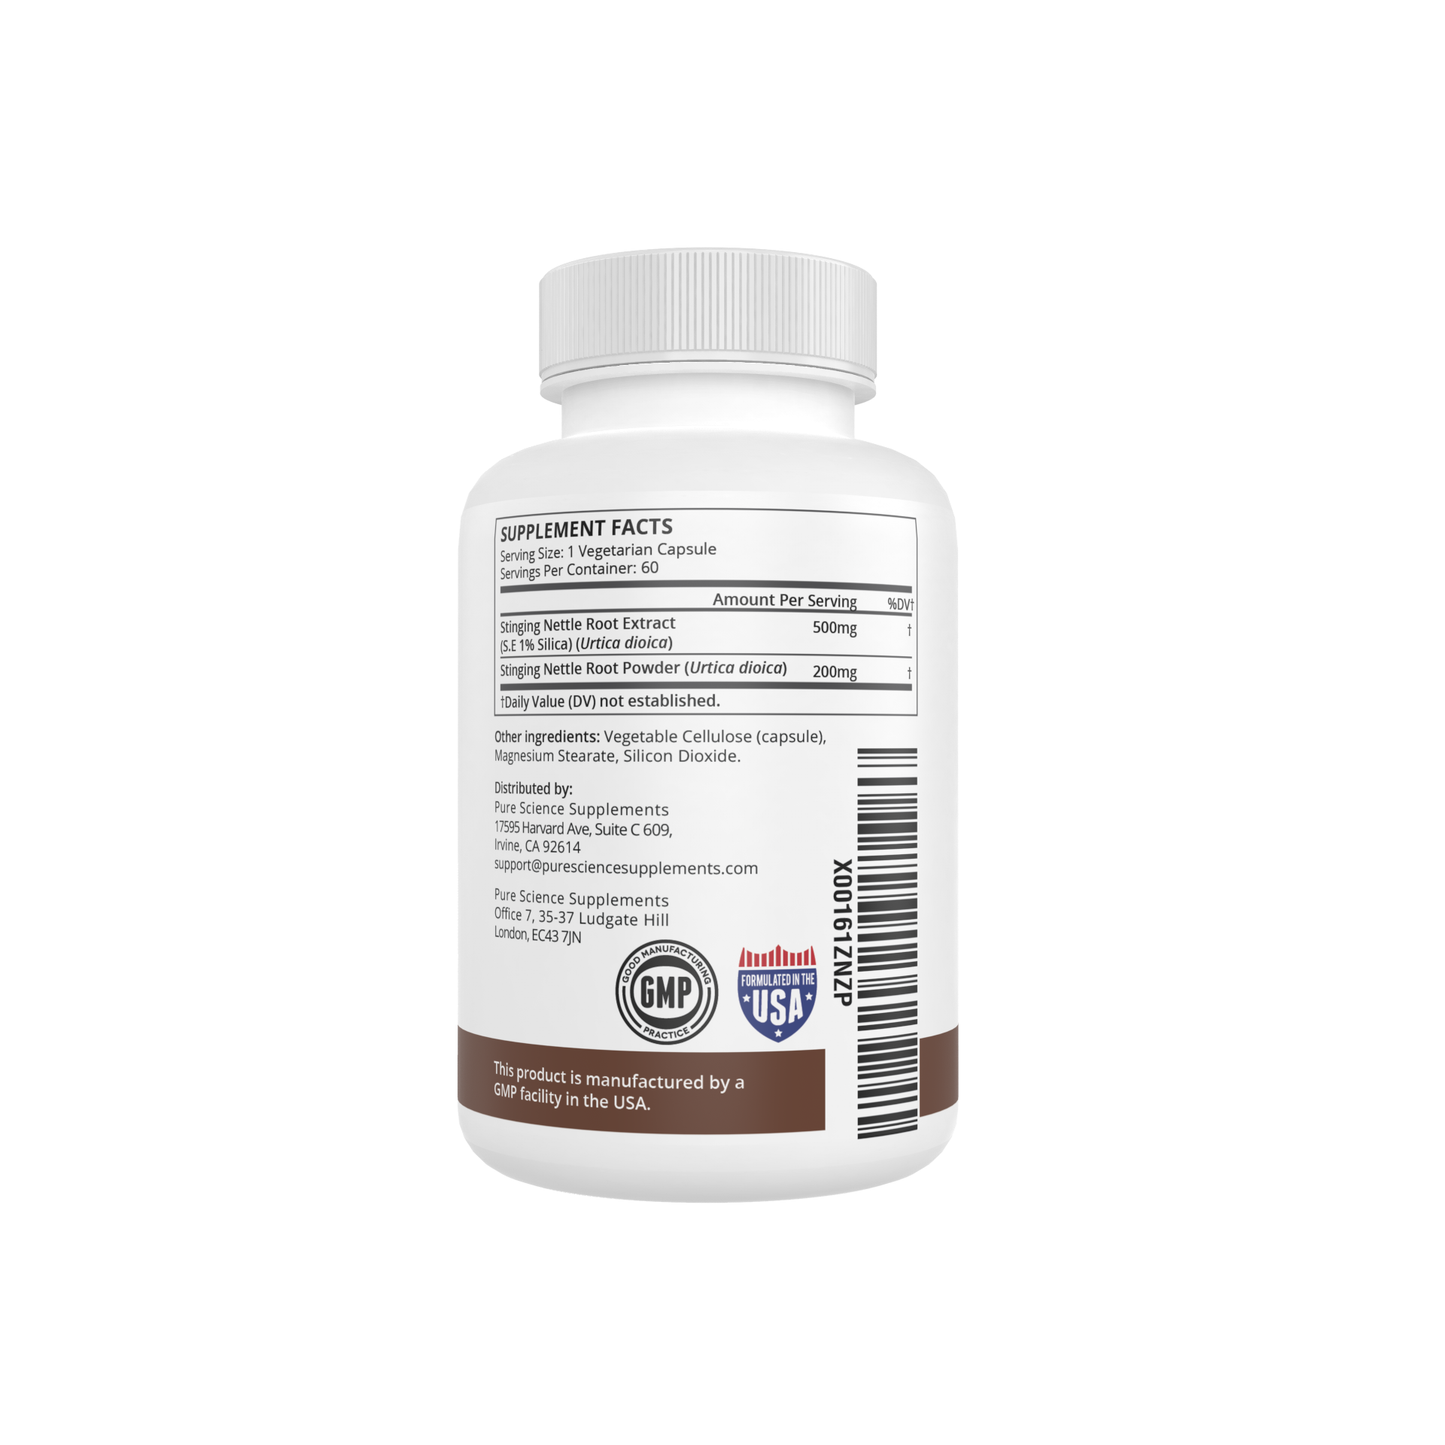 Pure Science Stinging Nettle Root Complex (1% Silica Extract ) with Bioperine - 60 Vegetarian Capsules